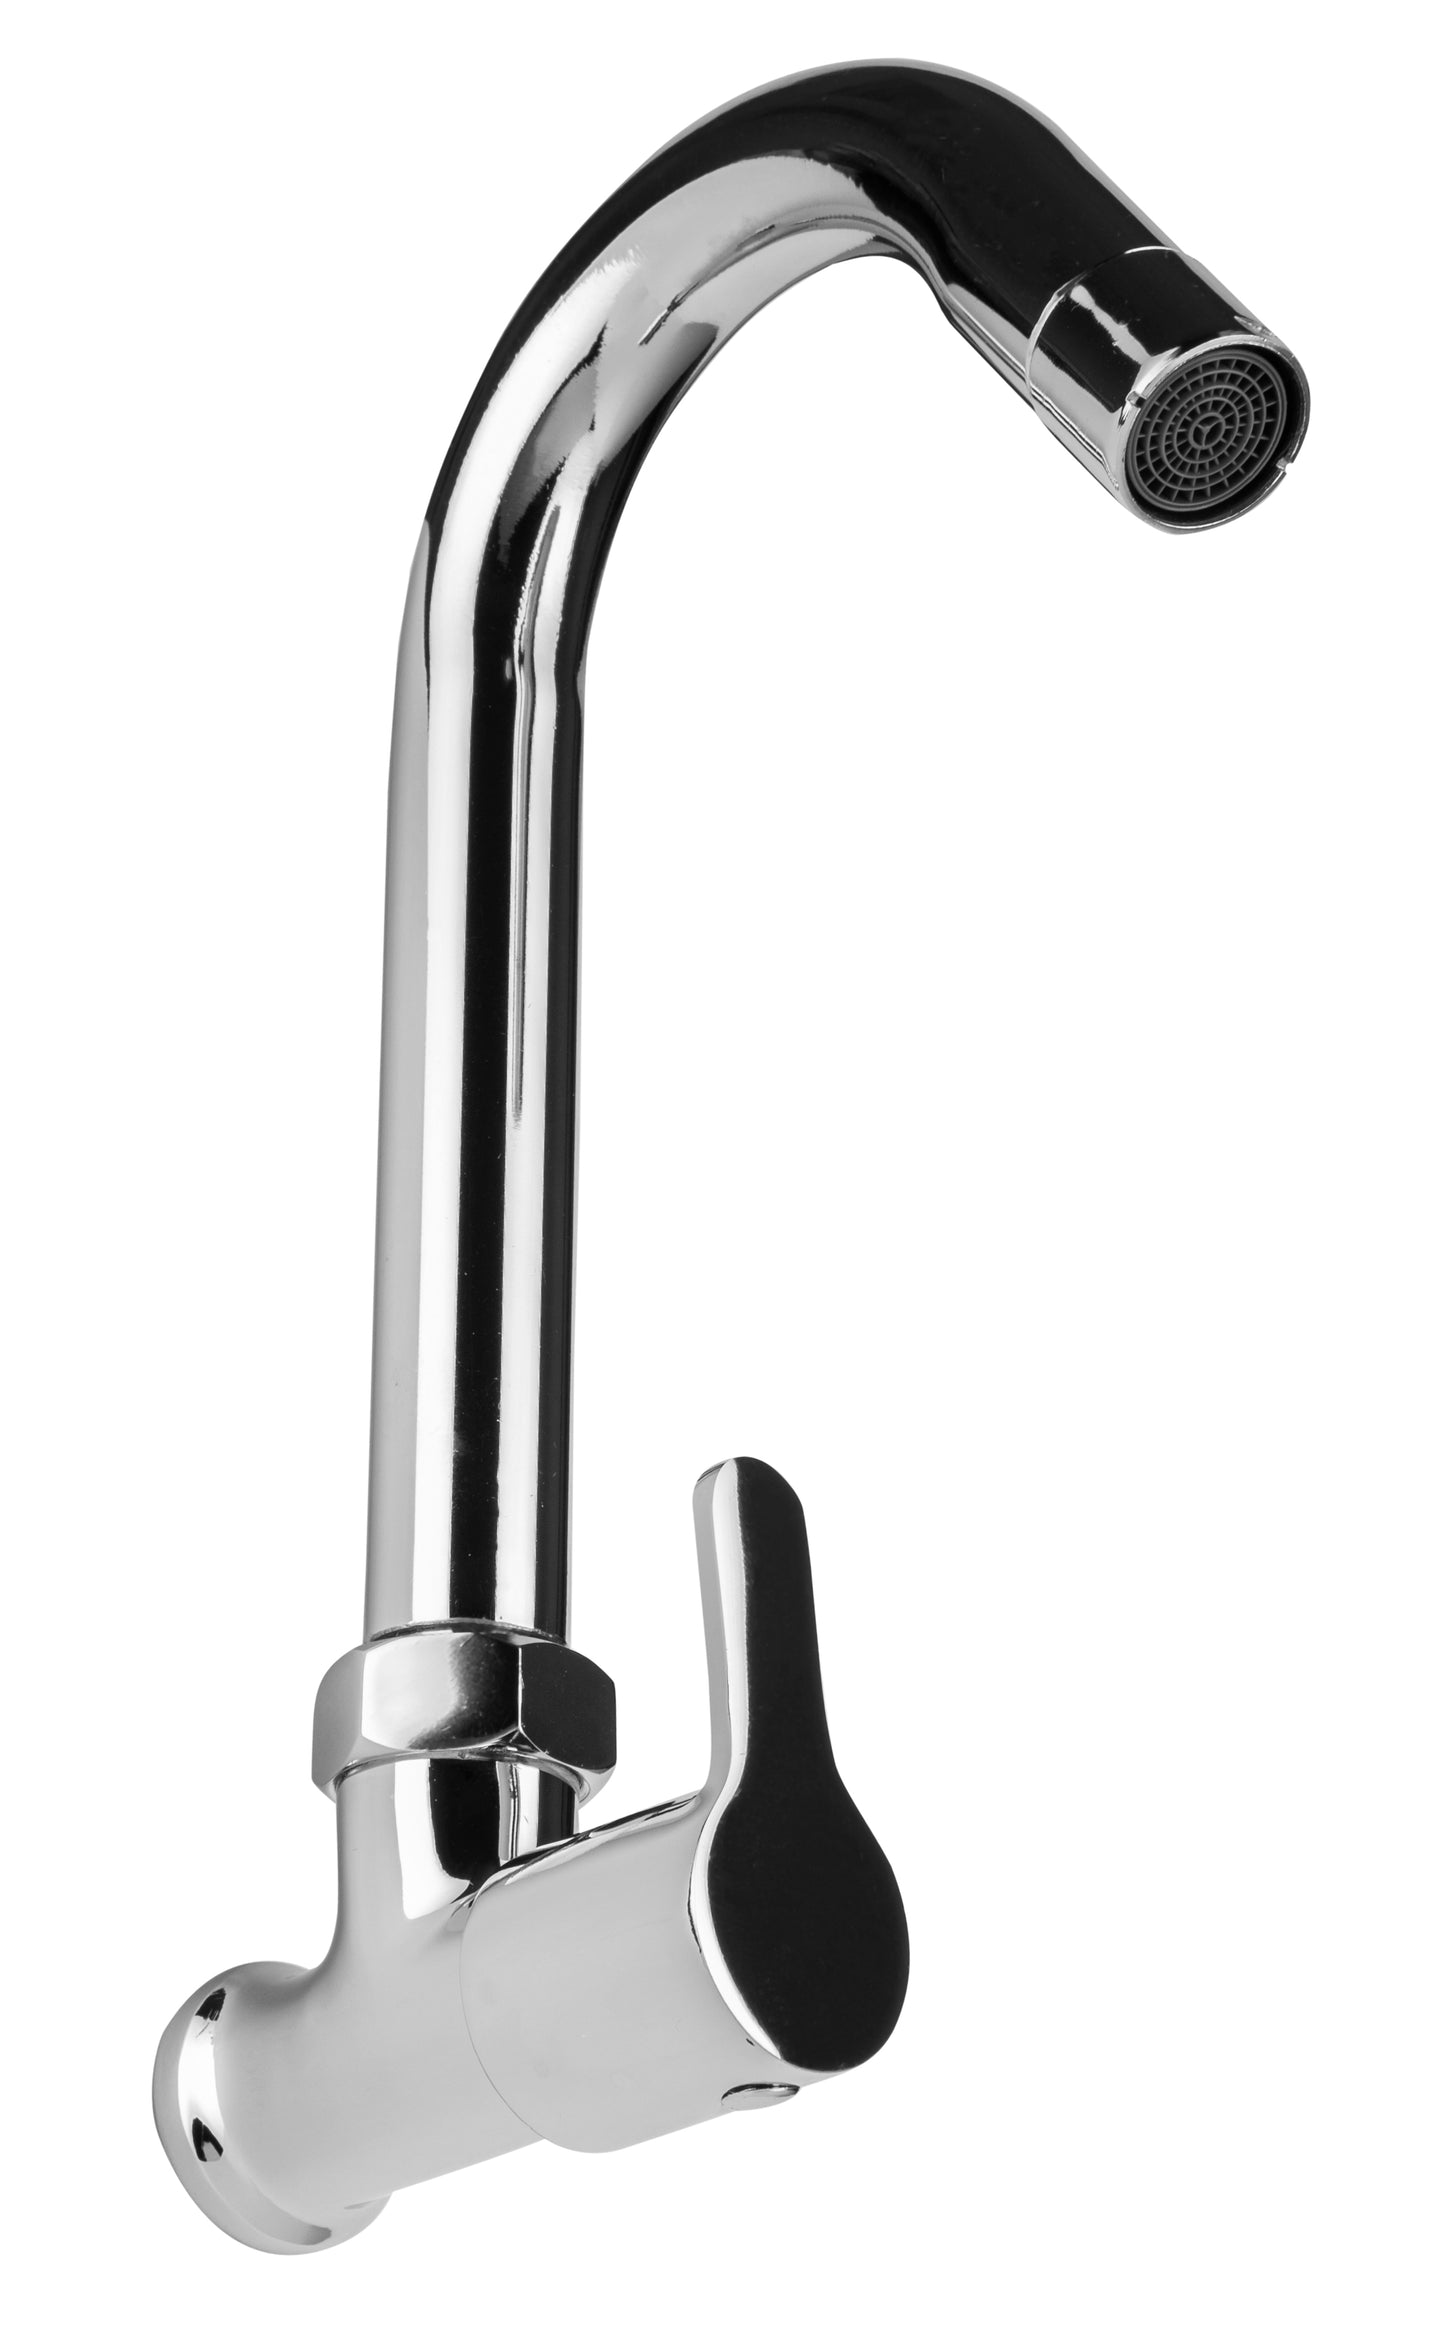 RiverSoft Sink cock fusion (Brass, Chrome, Pack of 1)